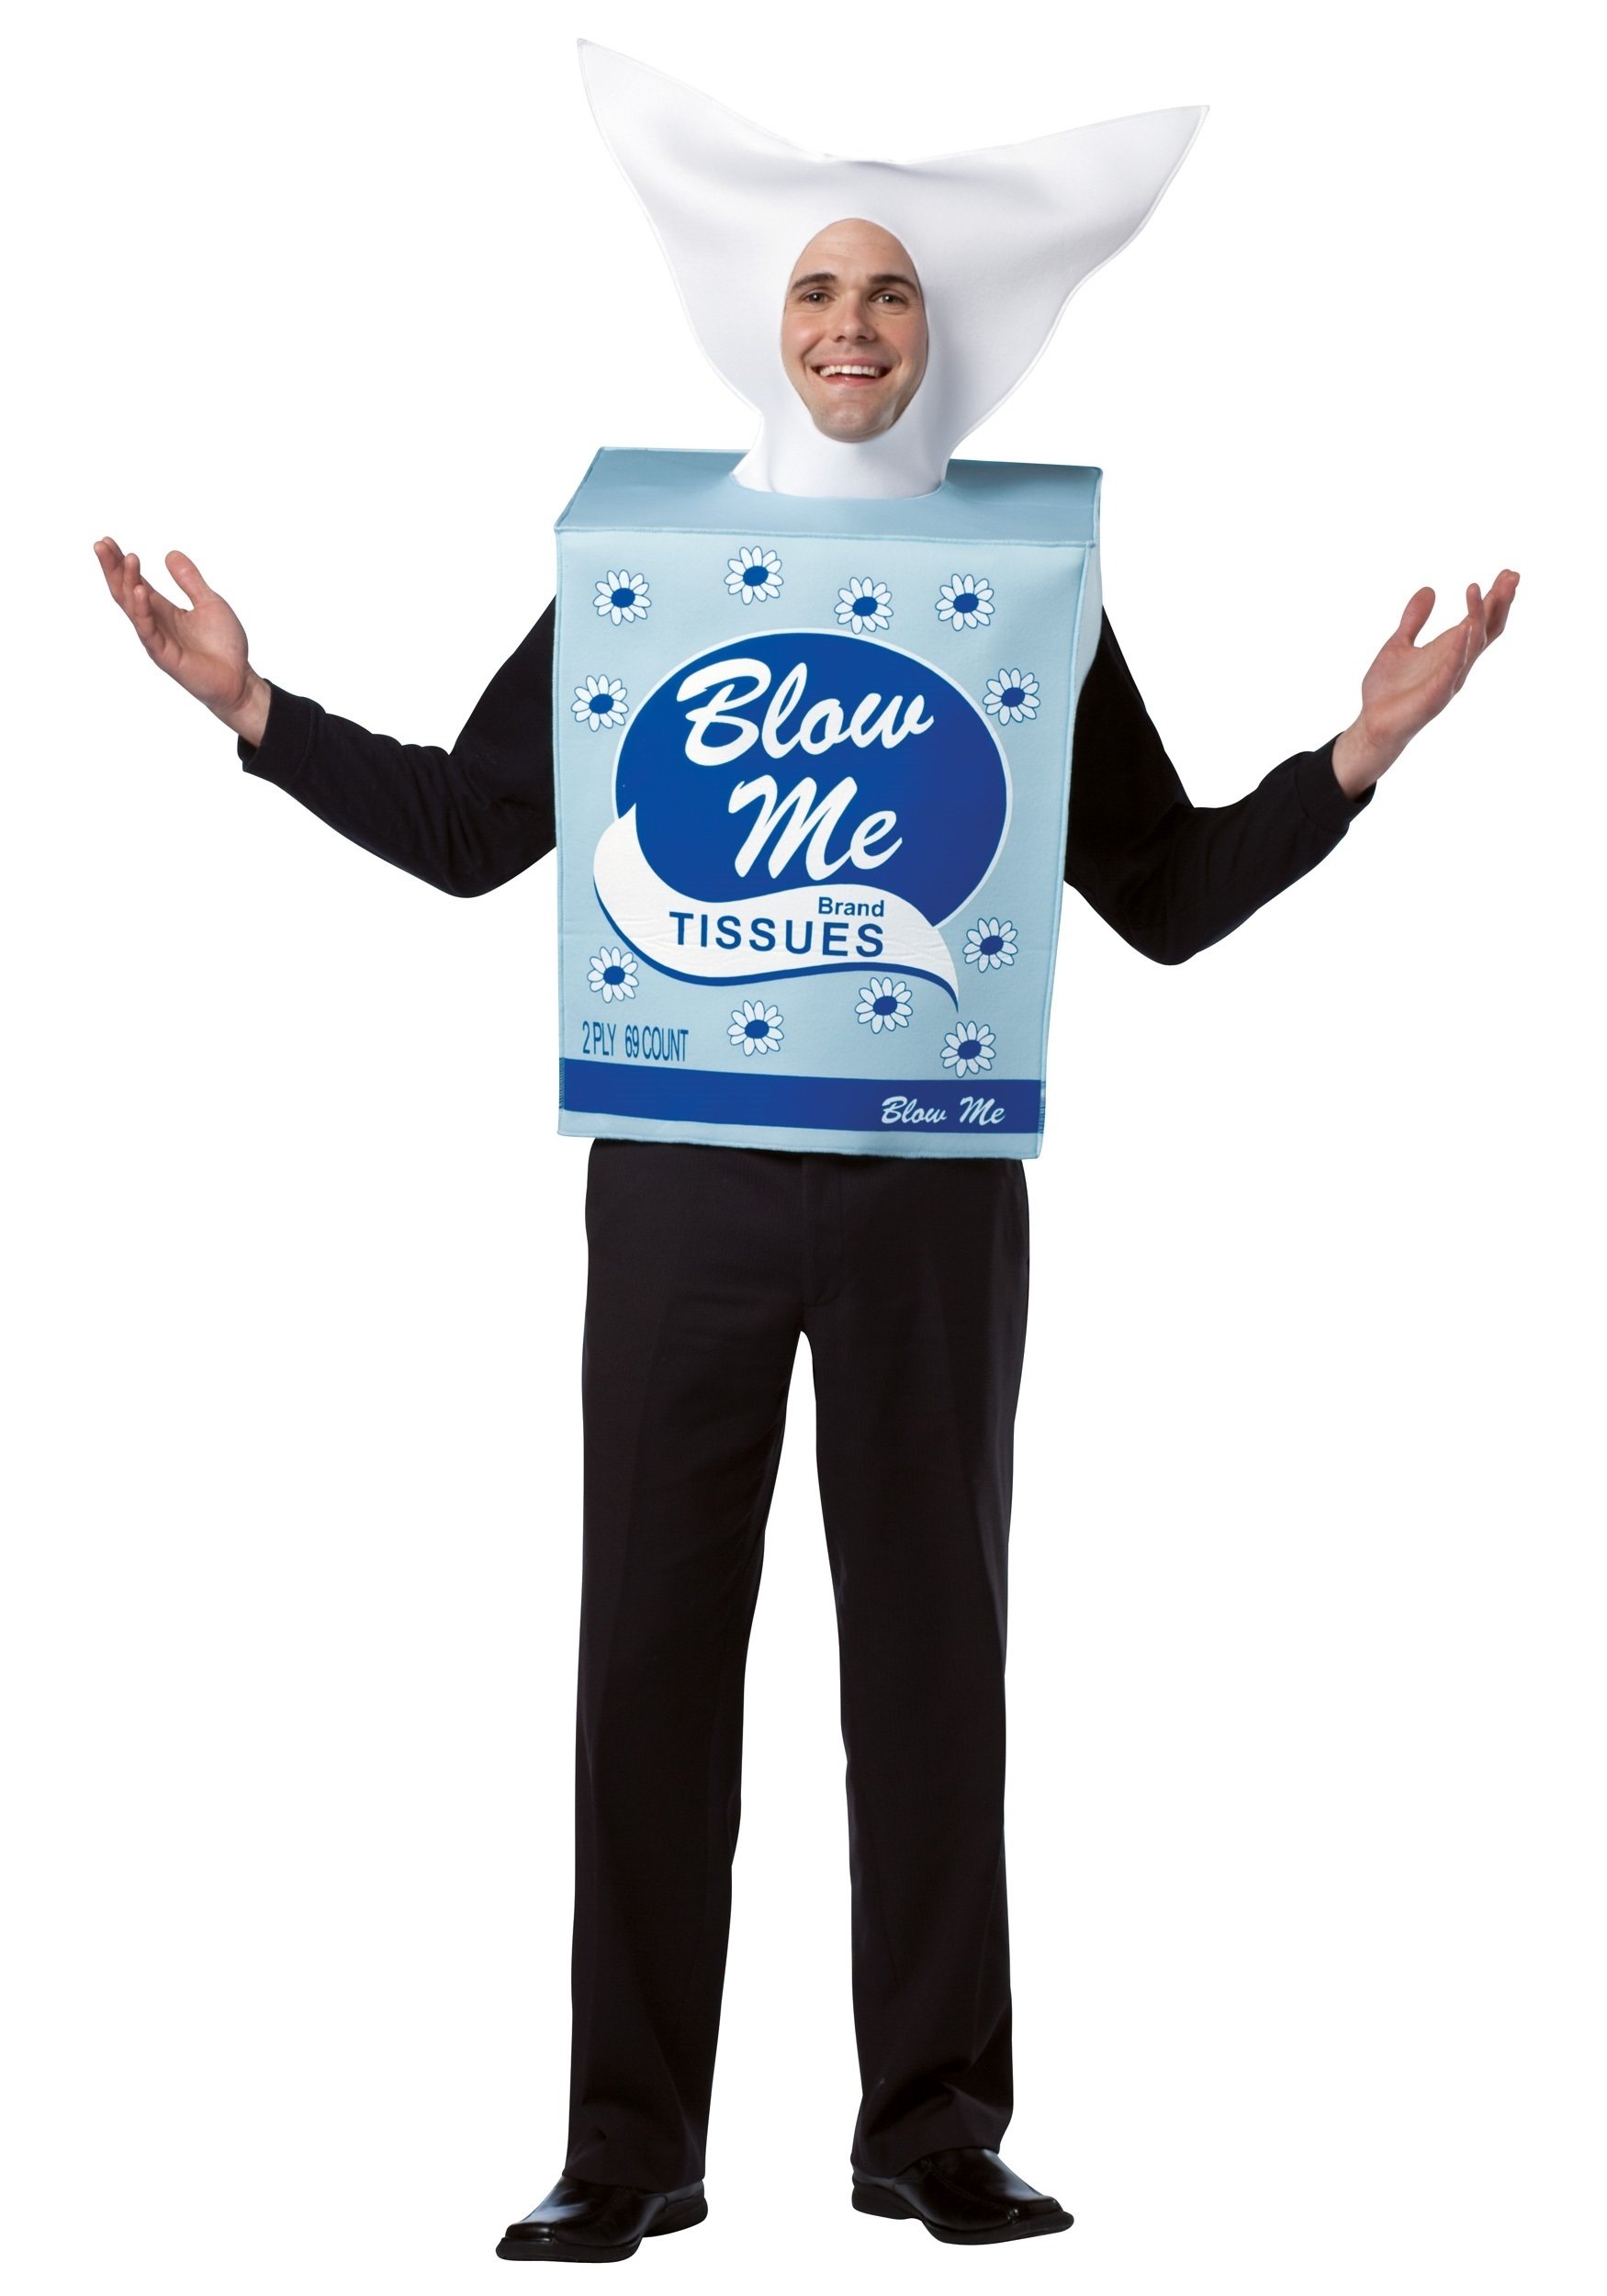 10 Fantastic Halloween Costumes Ideas For Adults blow me tissues costume halloween costumes 1 2022